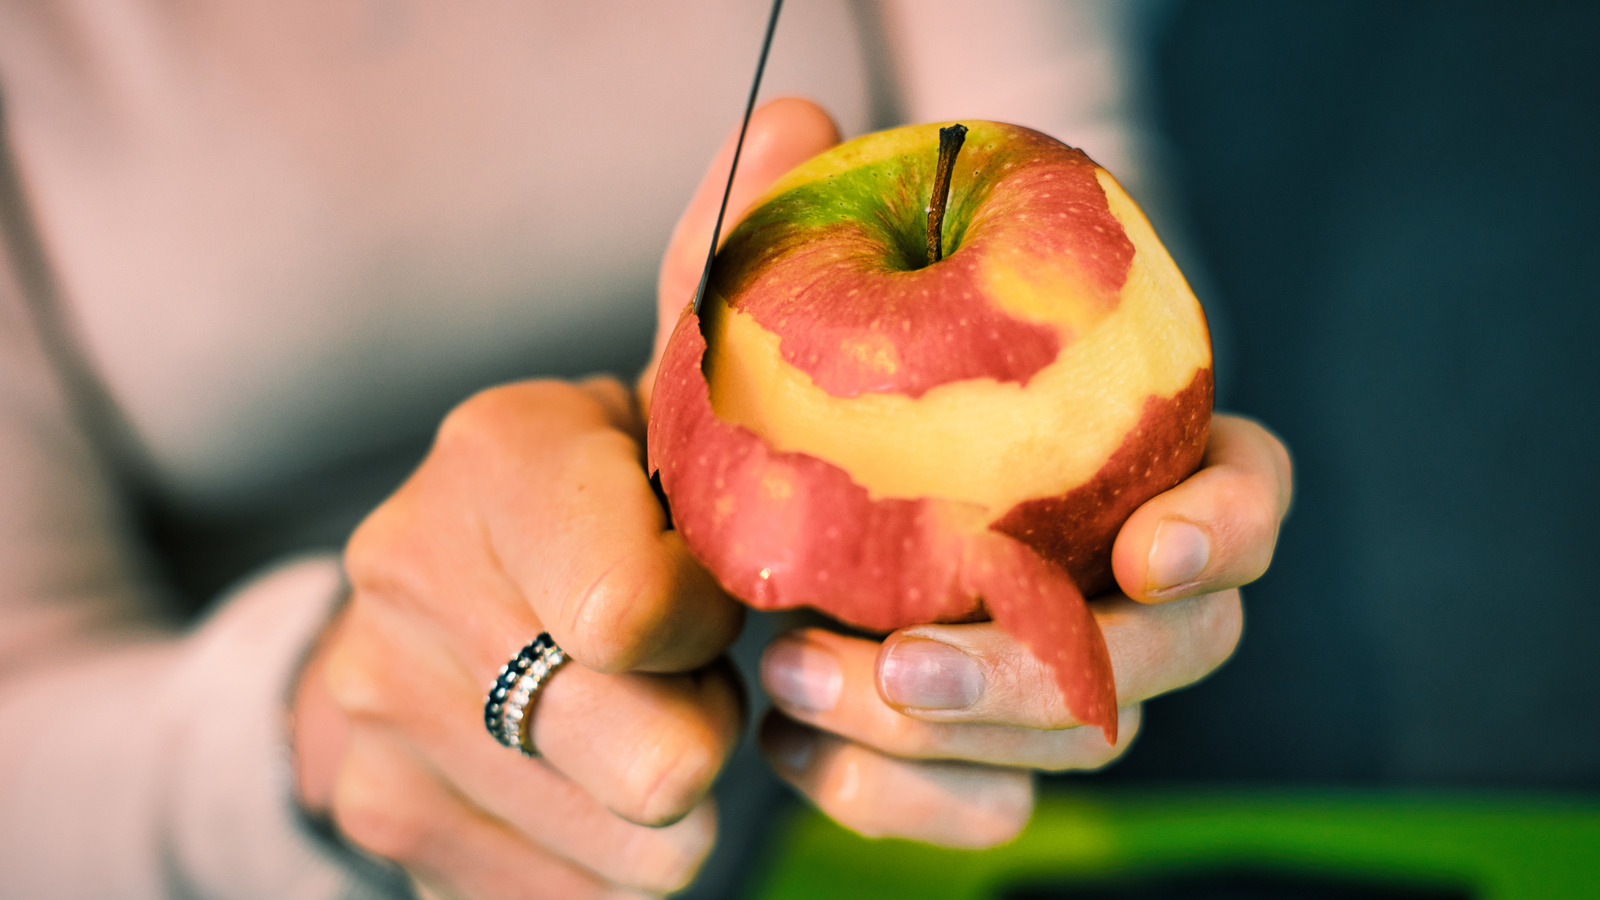 This Bizarre Hack Peels An Apple In 3 Seconds